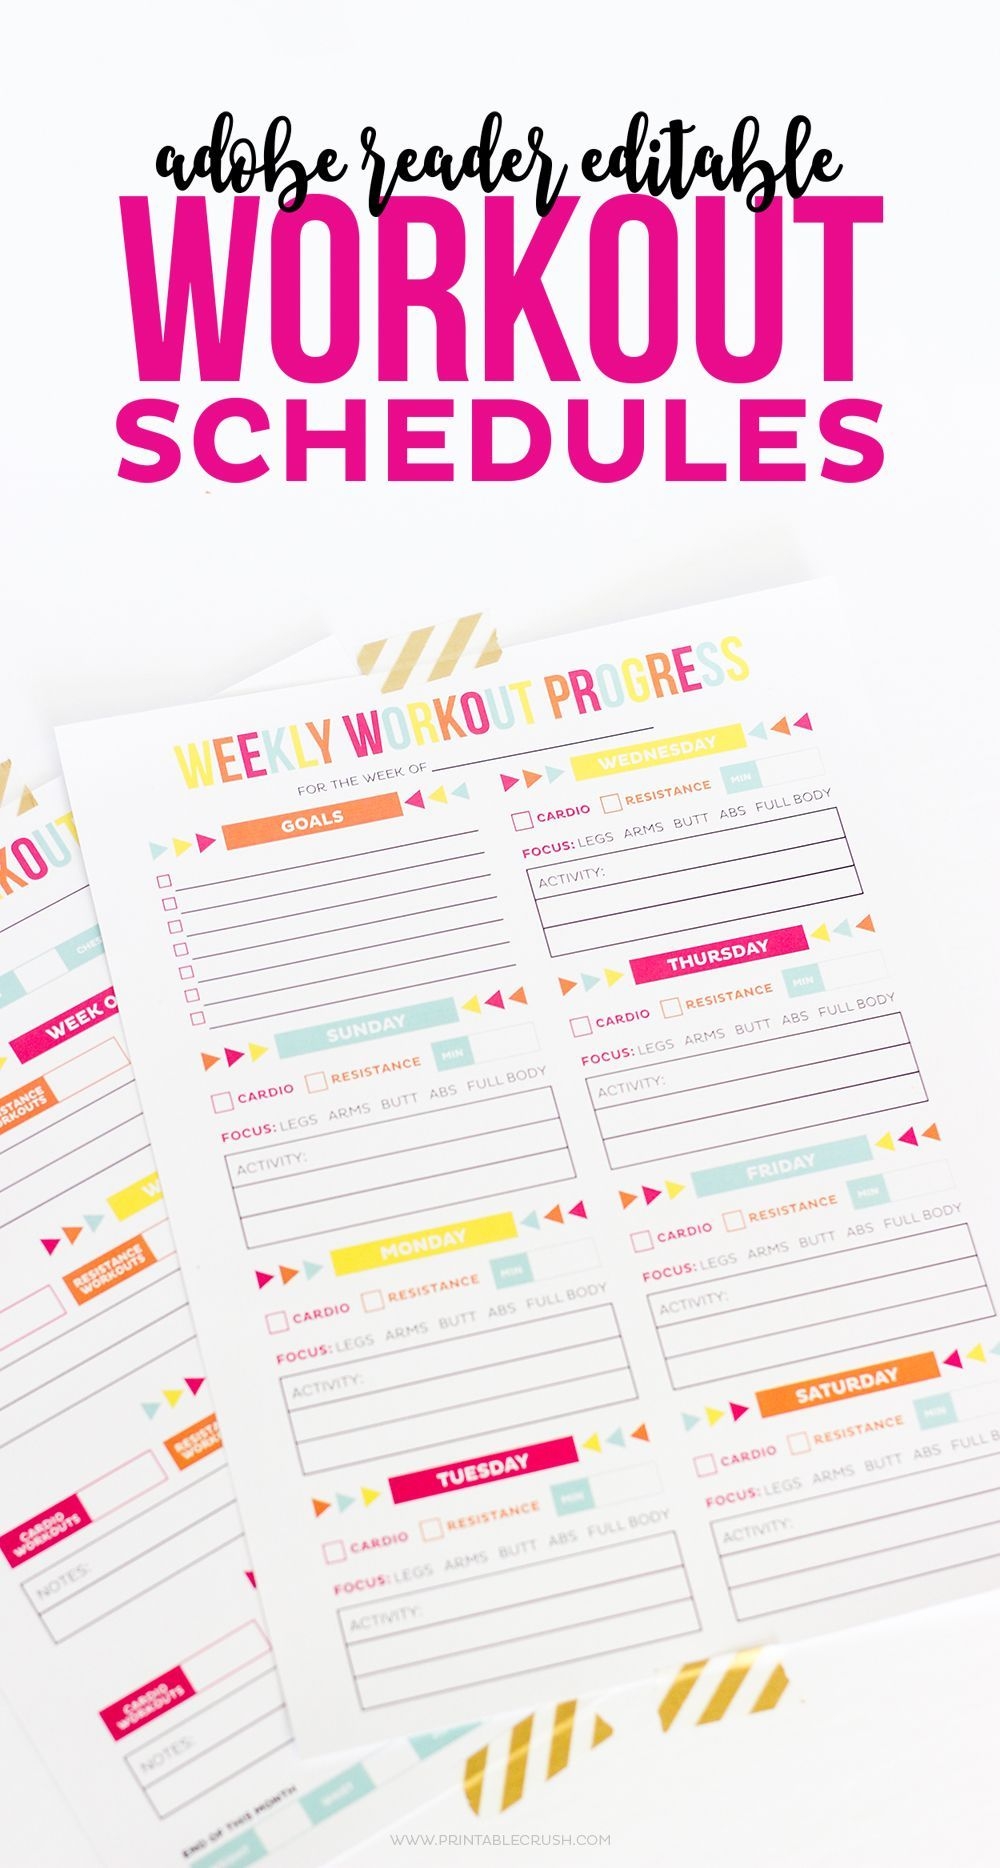 Editable Printable Workout Schedule (With Images